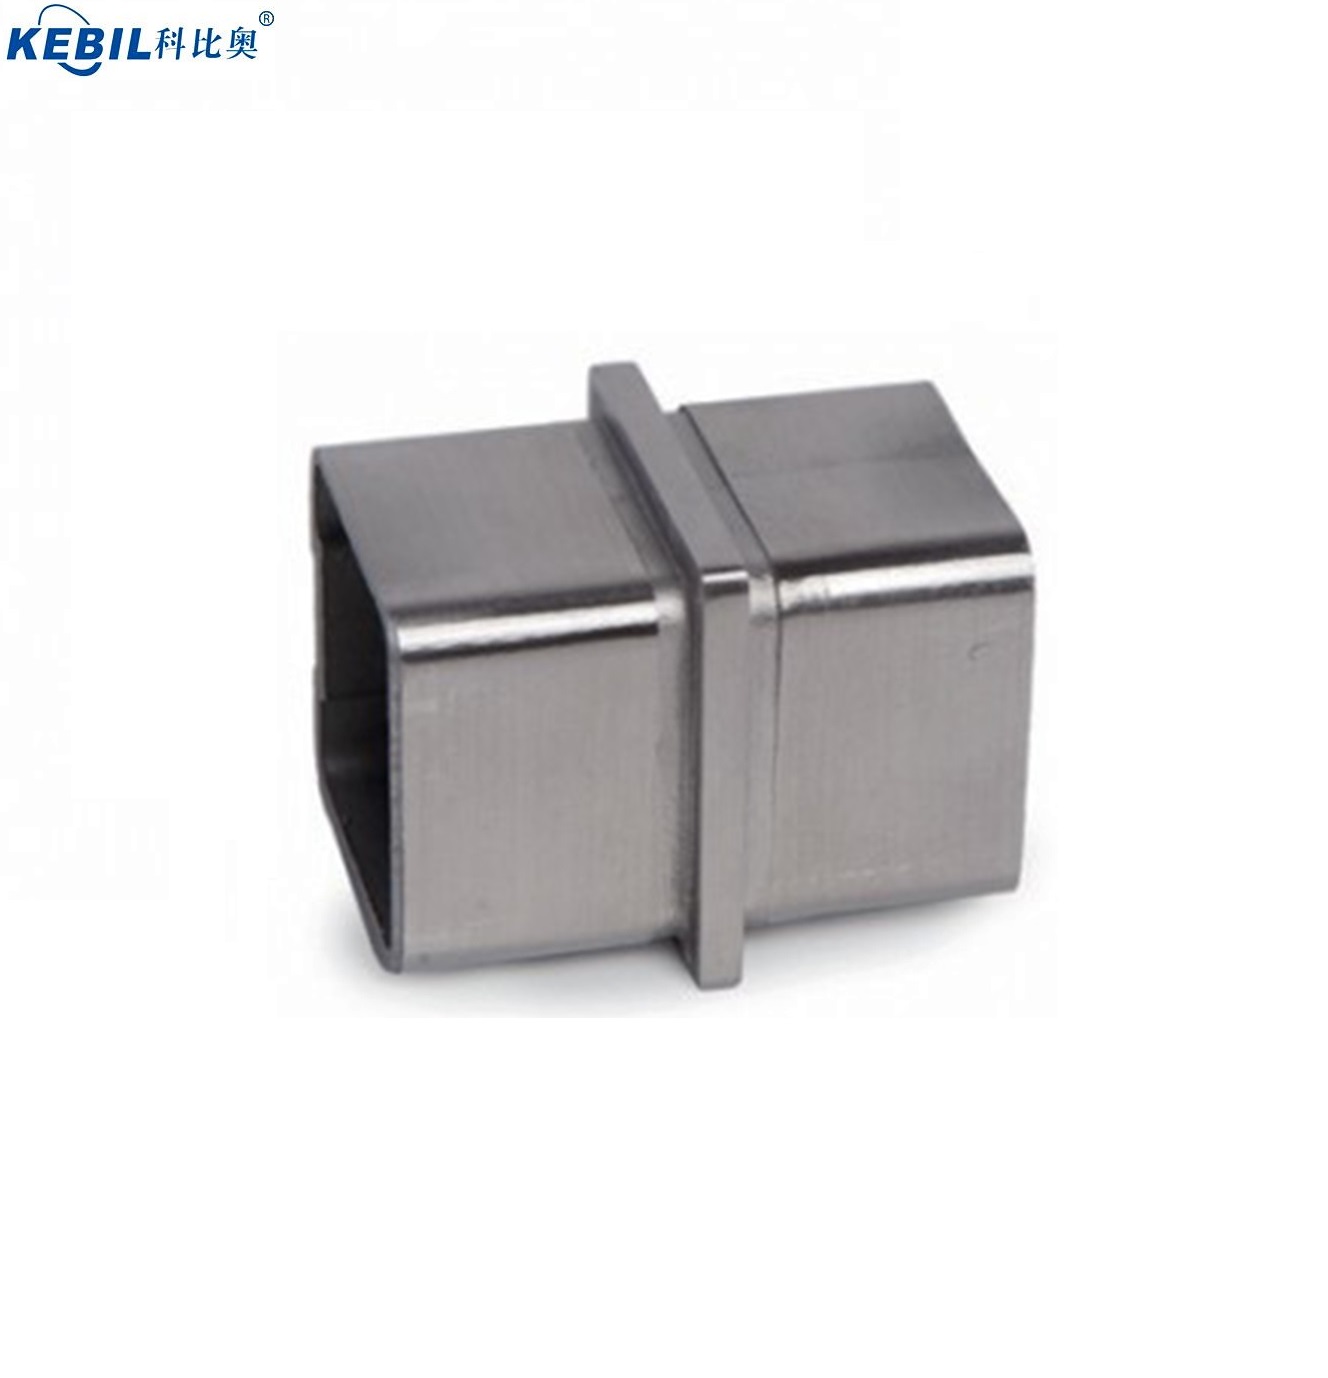 Stainless Steel Handrail Railing Connectors For Square Tubes